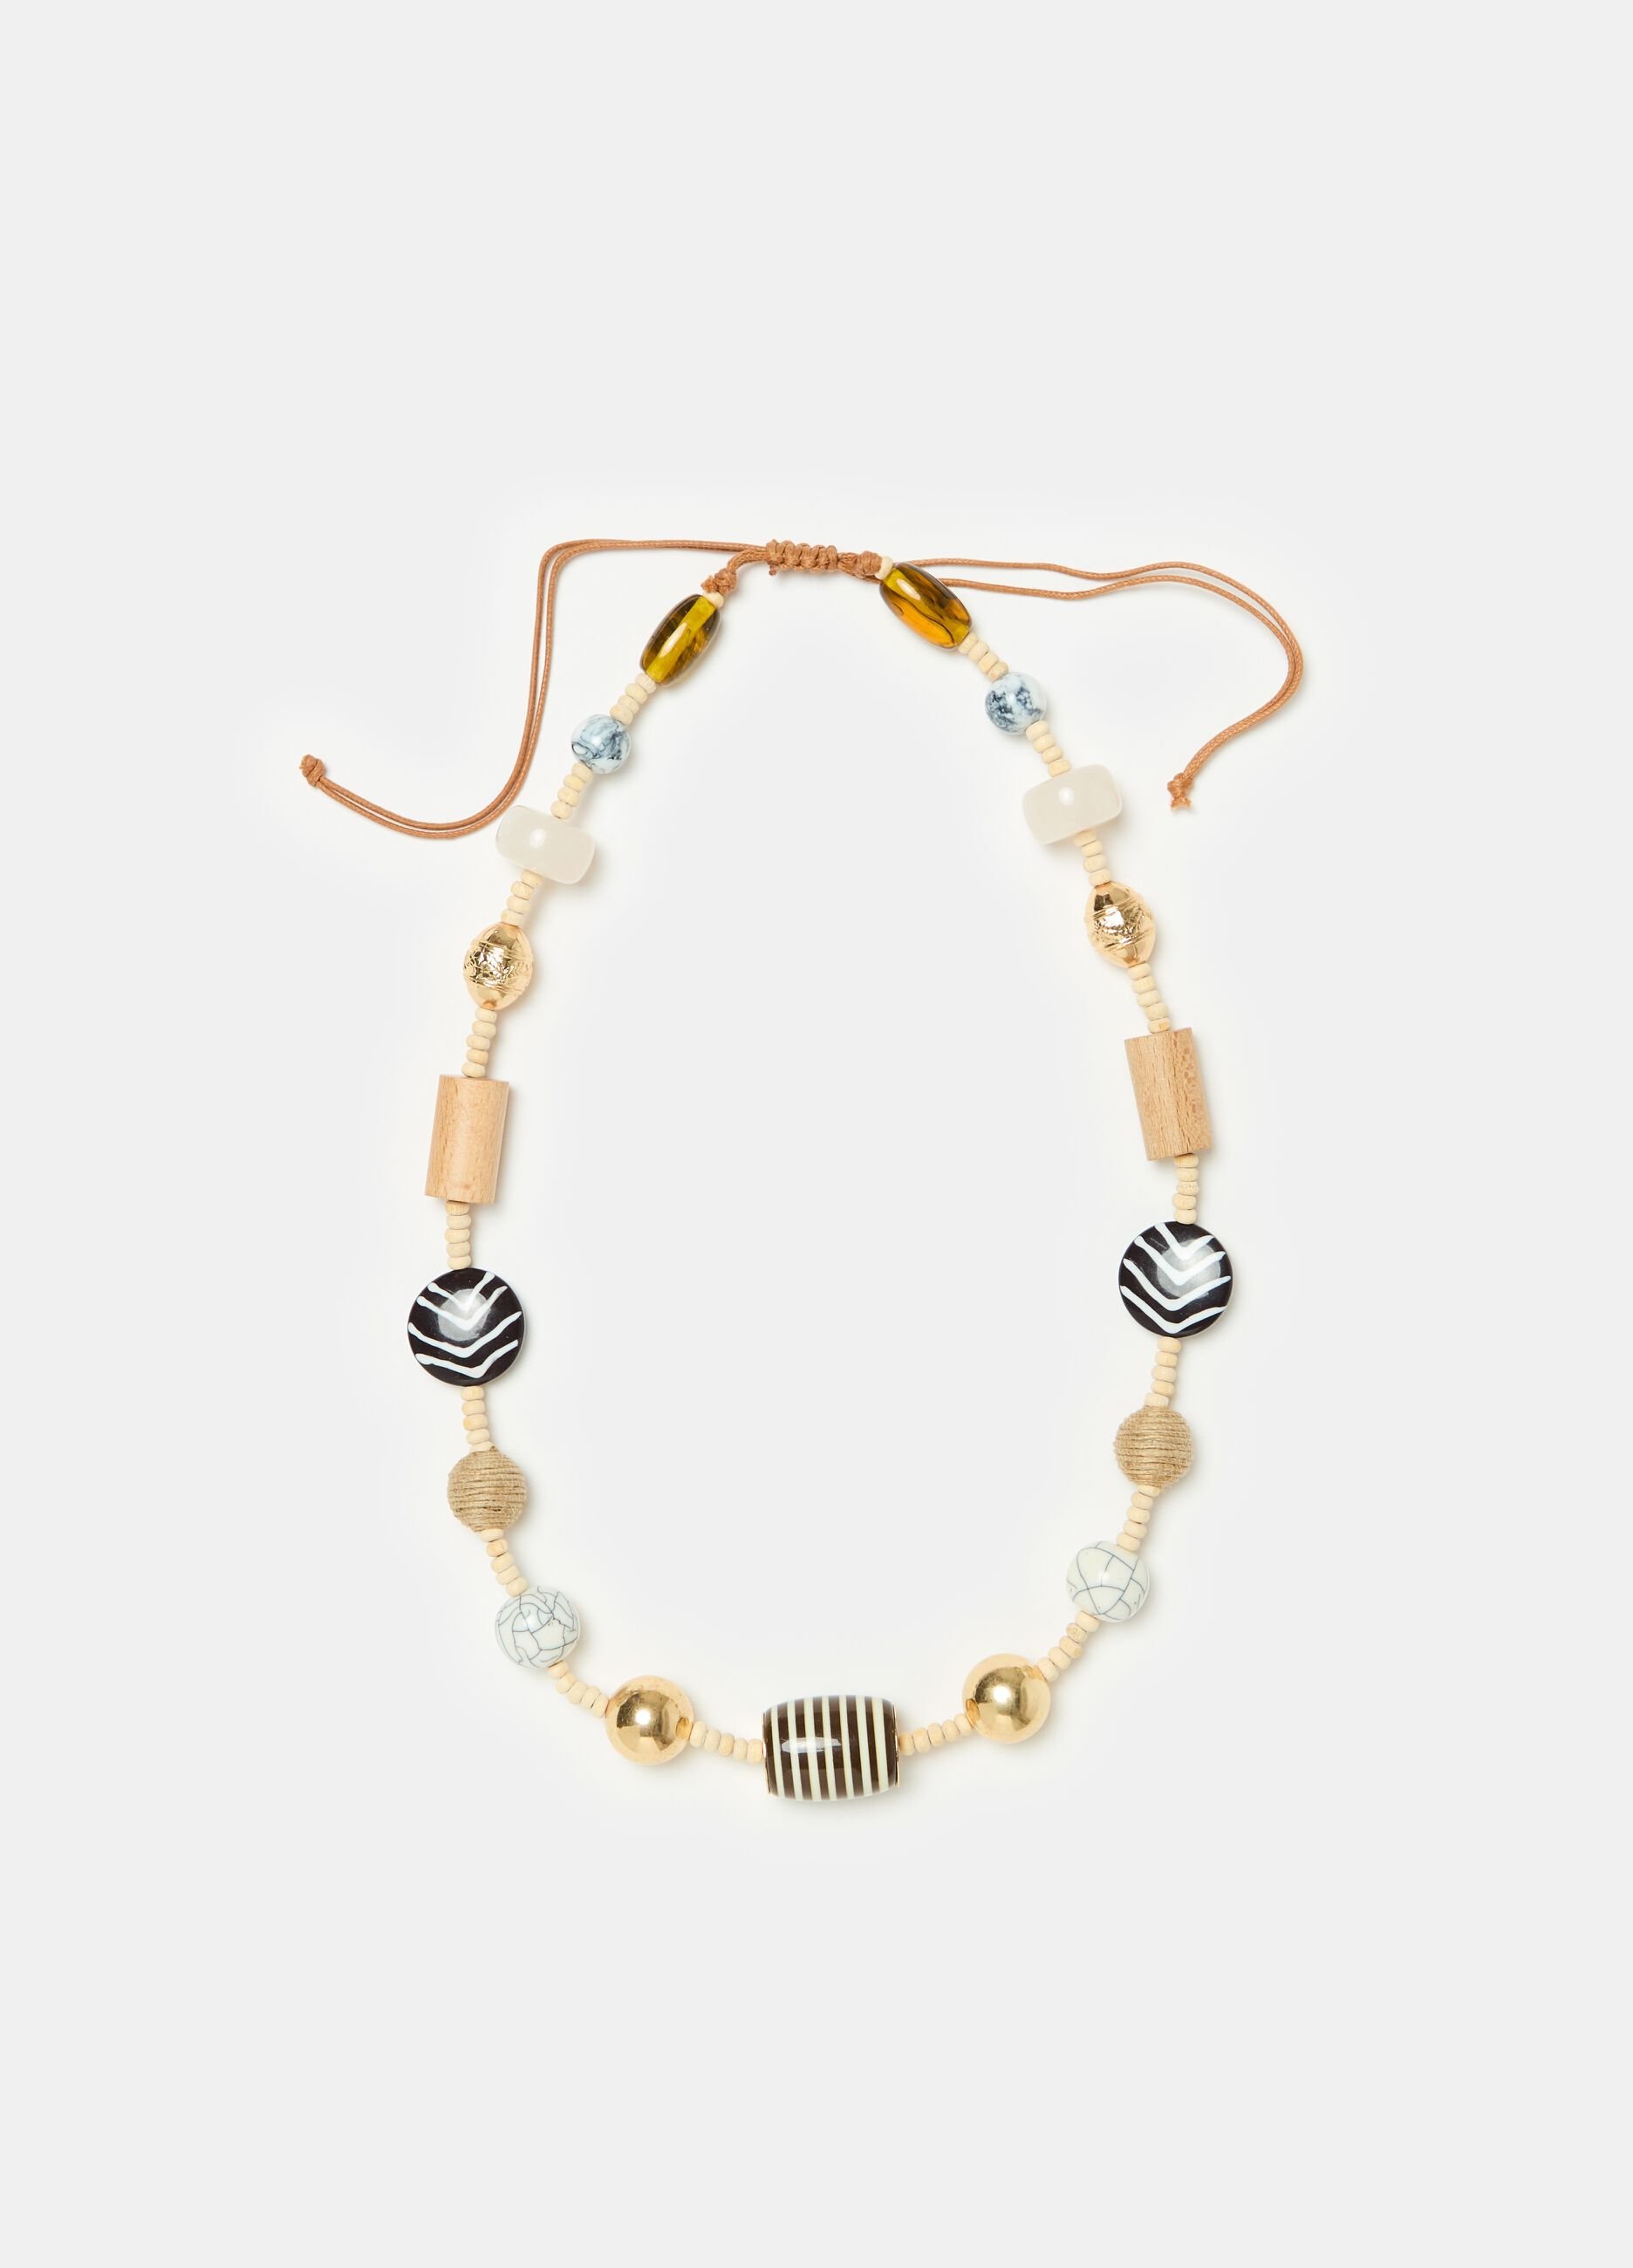 Adjustable necklace with beads and stones